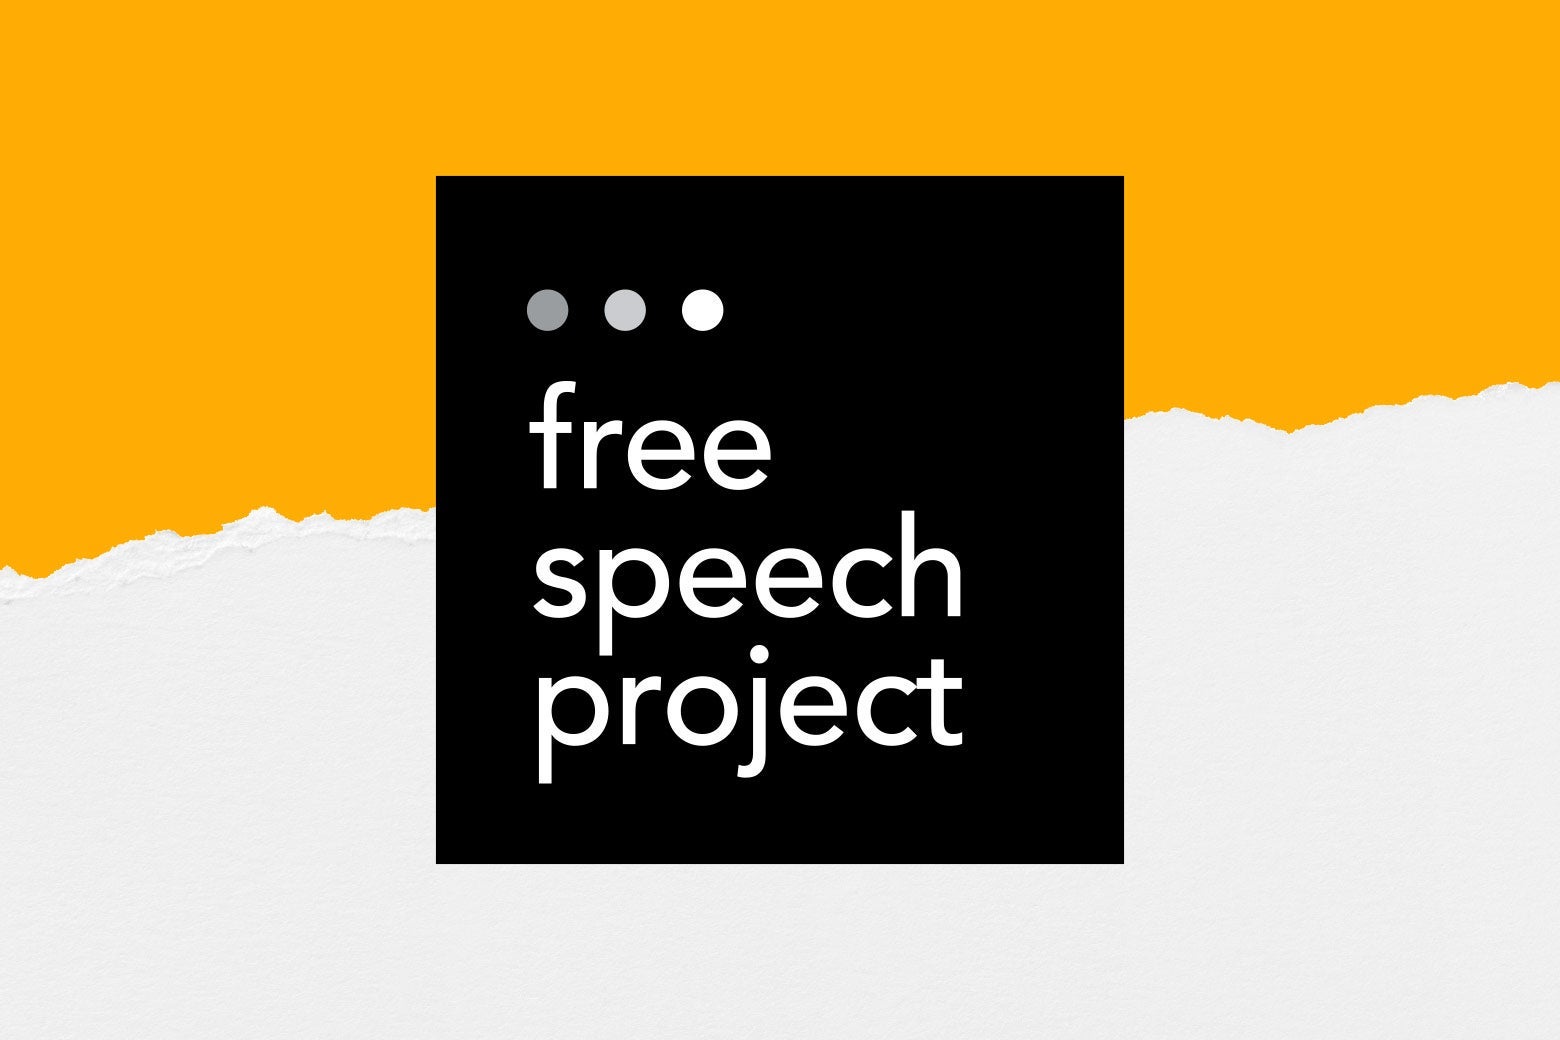 A black square with what text says "Free Speech Project" against a white and orange background.